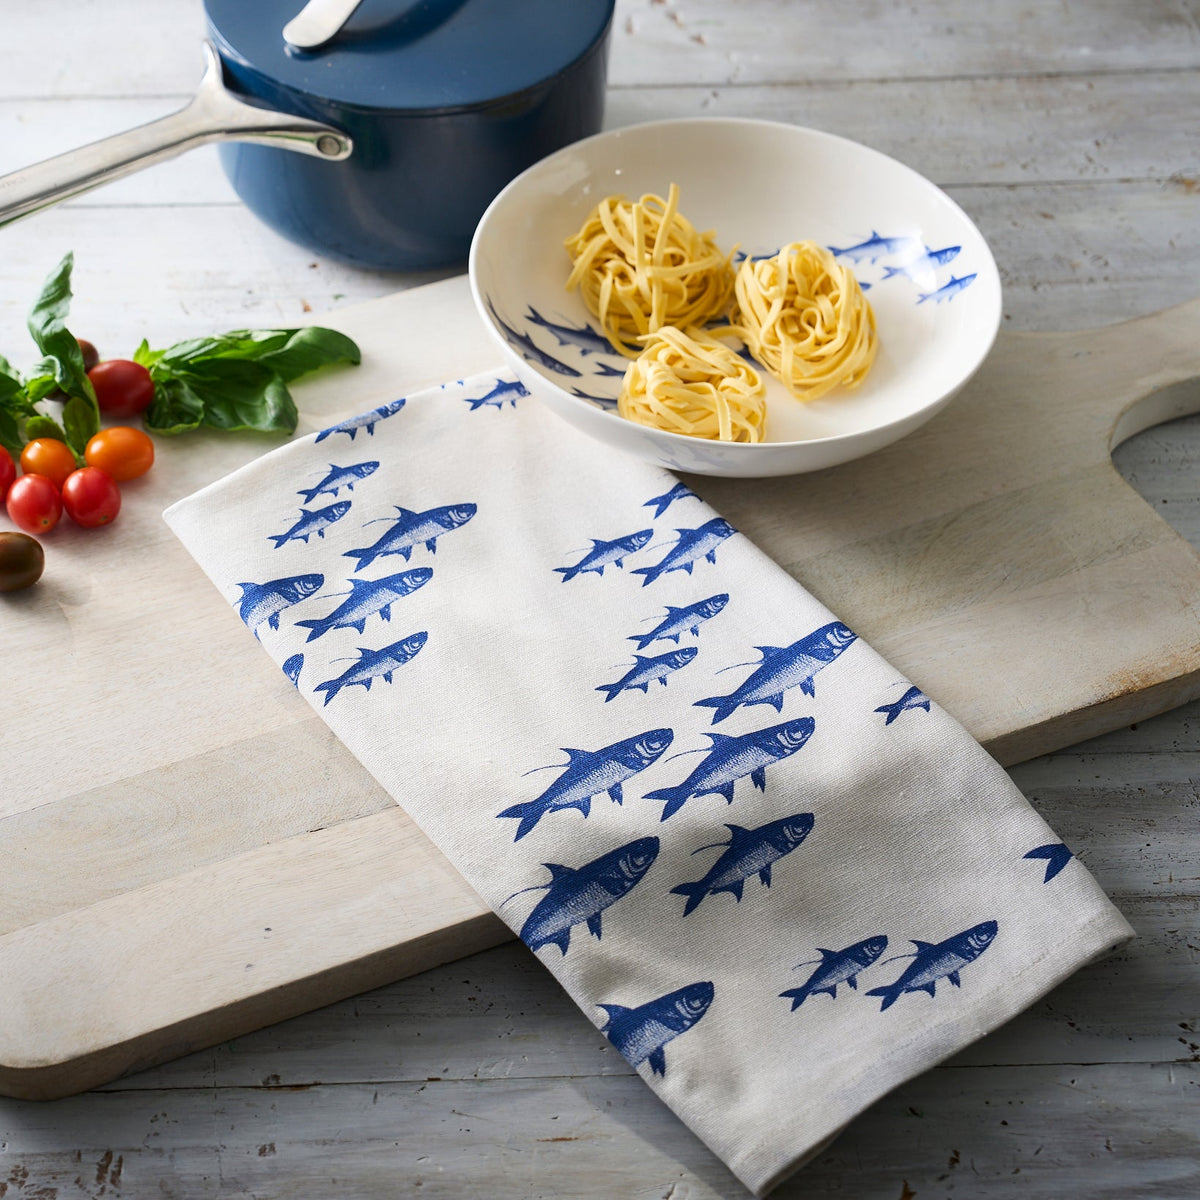 A School of Fish Kitchen Towels Set/2 from Caskata, featuring a school of blue and white fish, adds a touch of seafaring whimsy to your kitchen.